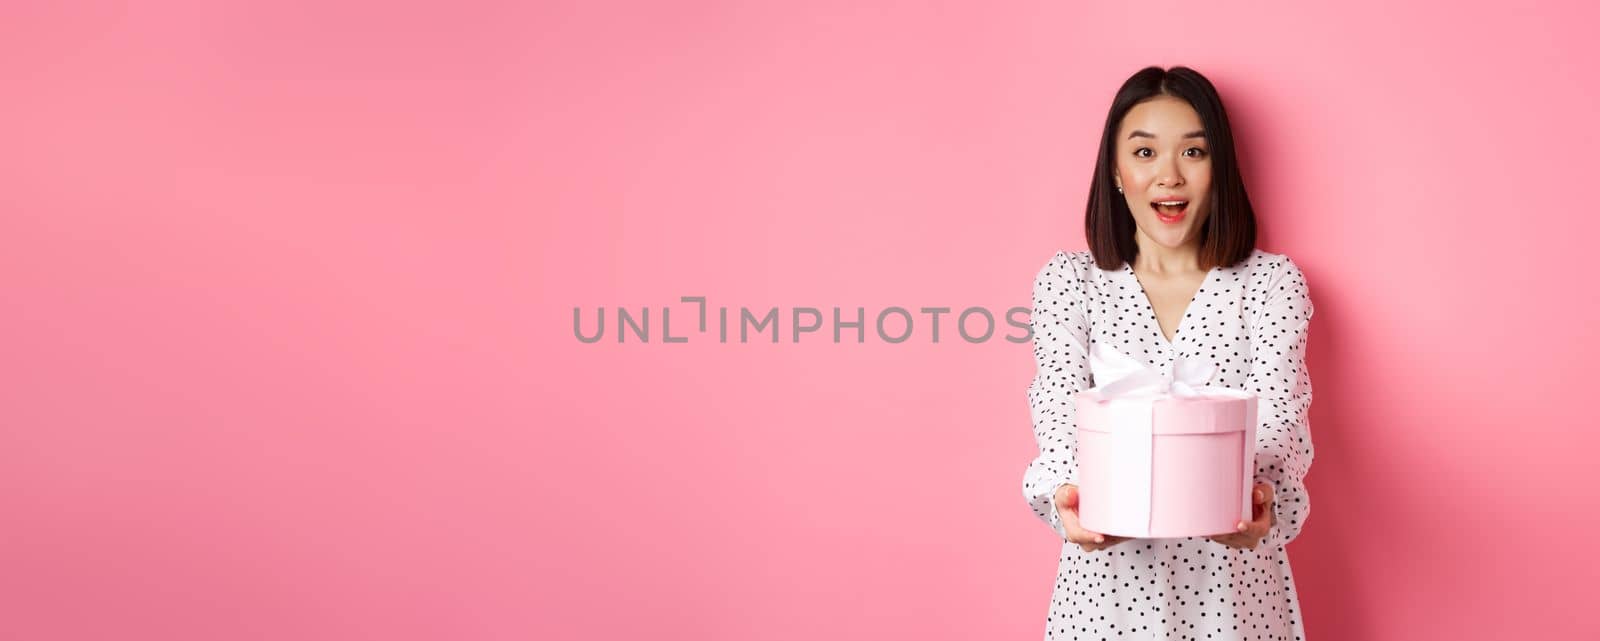 Cute asian woman congratulate with holiday or birthday, giving gift in cute box, standing over pink background.